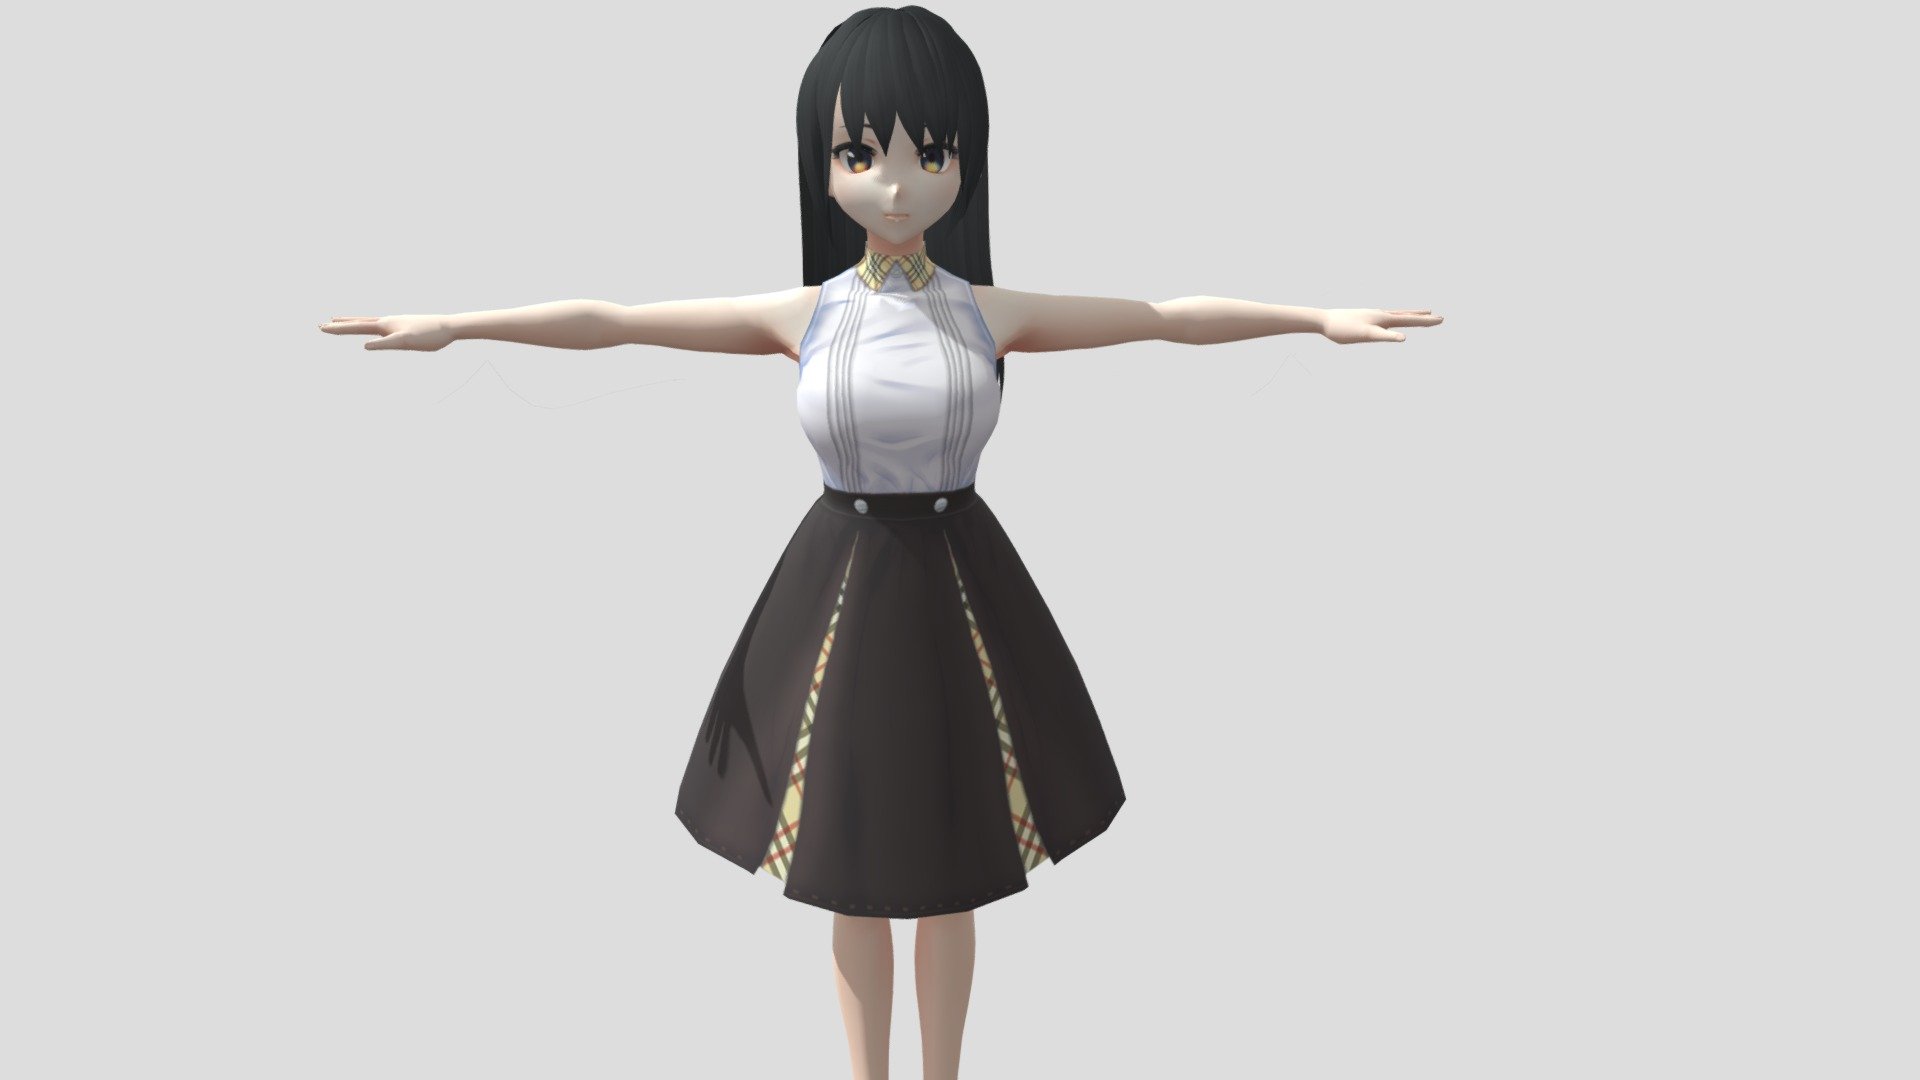 Model preview(Arisa)

Model preview(Xiang)



This character model belongs to Japanese anime style, all models has been converted into fbx file using blender, users can add their favorite animations on mixamo website, then apply to unity versions above 2019



Character : Arisa

Verts:16305

Tris:23570

Fourteen textures for the character



Character : Xiang

Verts:28159

Tris:37724

Sixteen textures for the character



This package contains VRM files, which can make the character module more refined, please refer to the manual for details



▶Commercial use allowed

▶Forbid secondary sales



Welcome add my website to credit :

Sketchfab

Pixiv

VRoidHub
 - 【Anime Character】Arisa/Xiang (V2/Unity 3D) - Buy Royalty Free 3D model by 3D動漫風角色屋 / 3D Anime Character Store (@alex94i60) 3d model